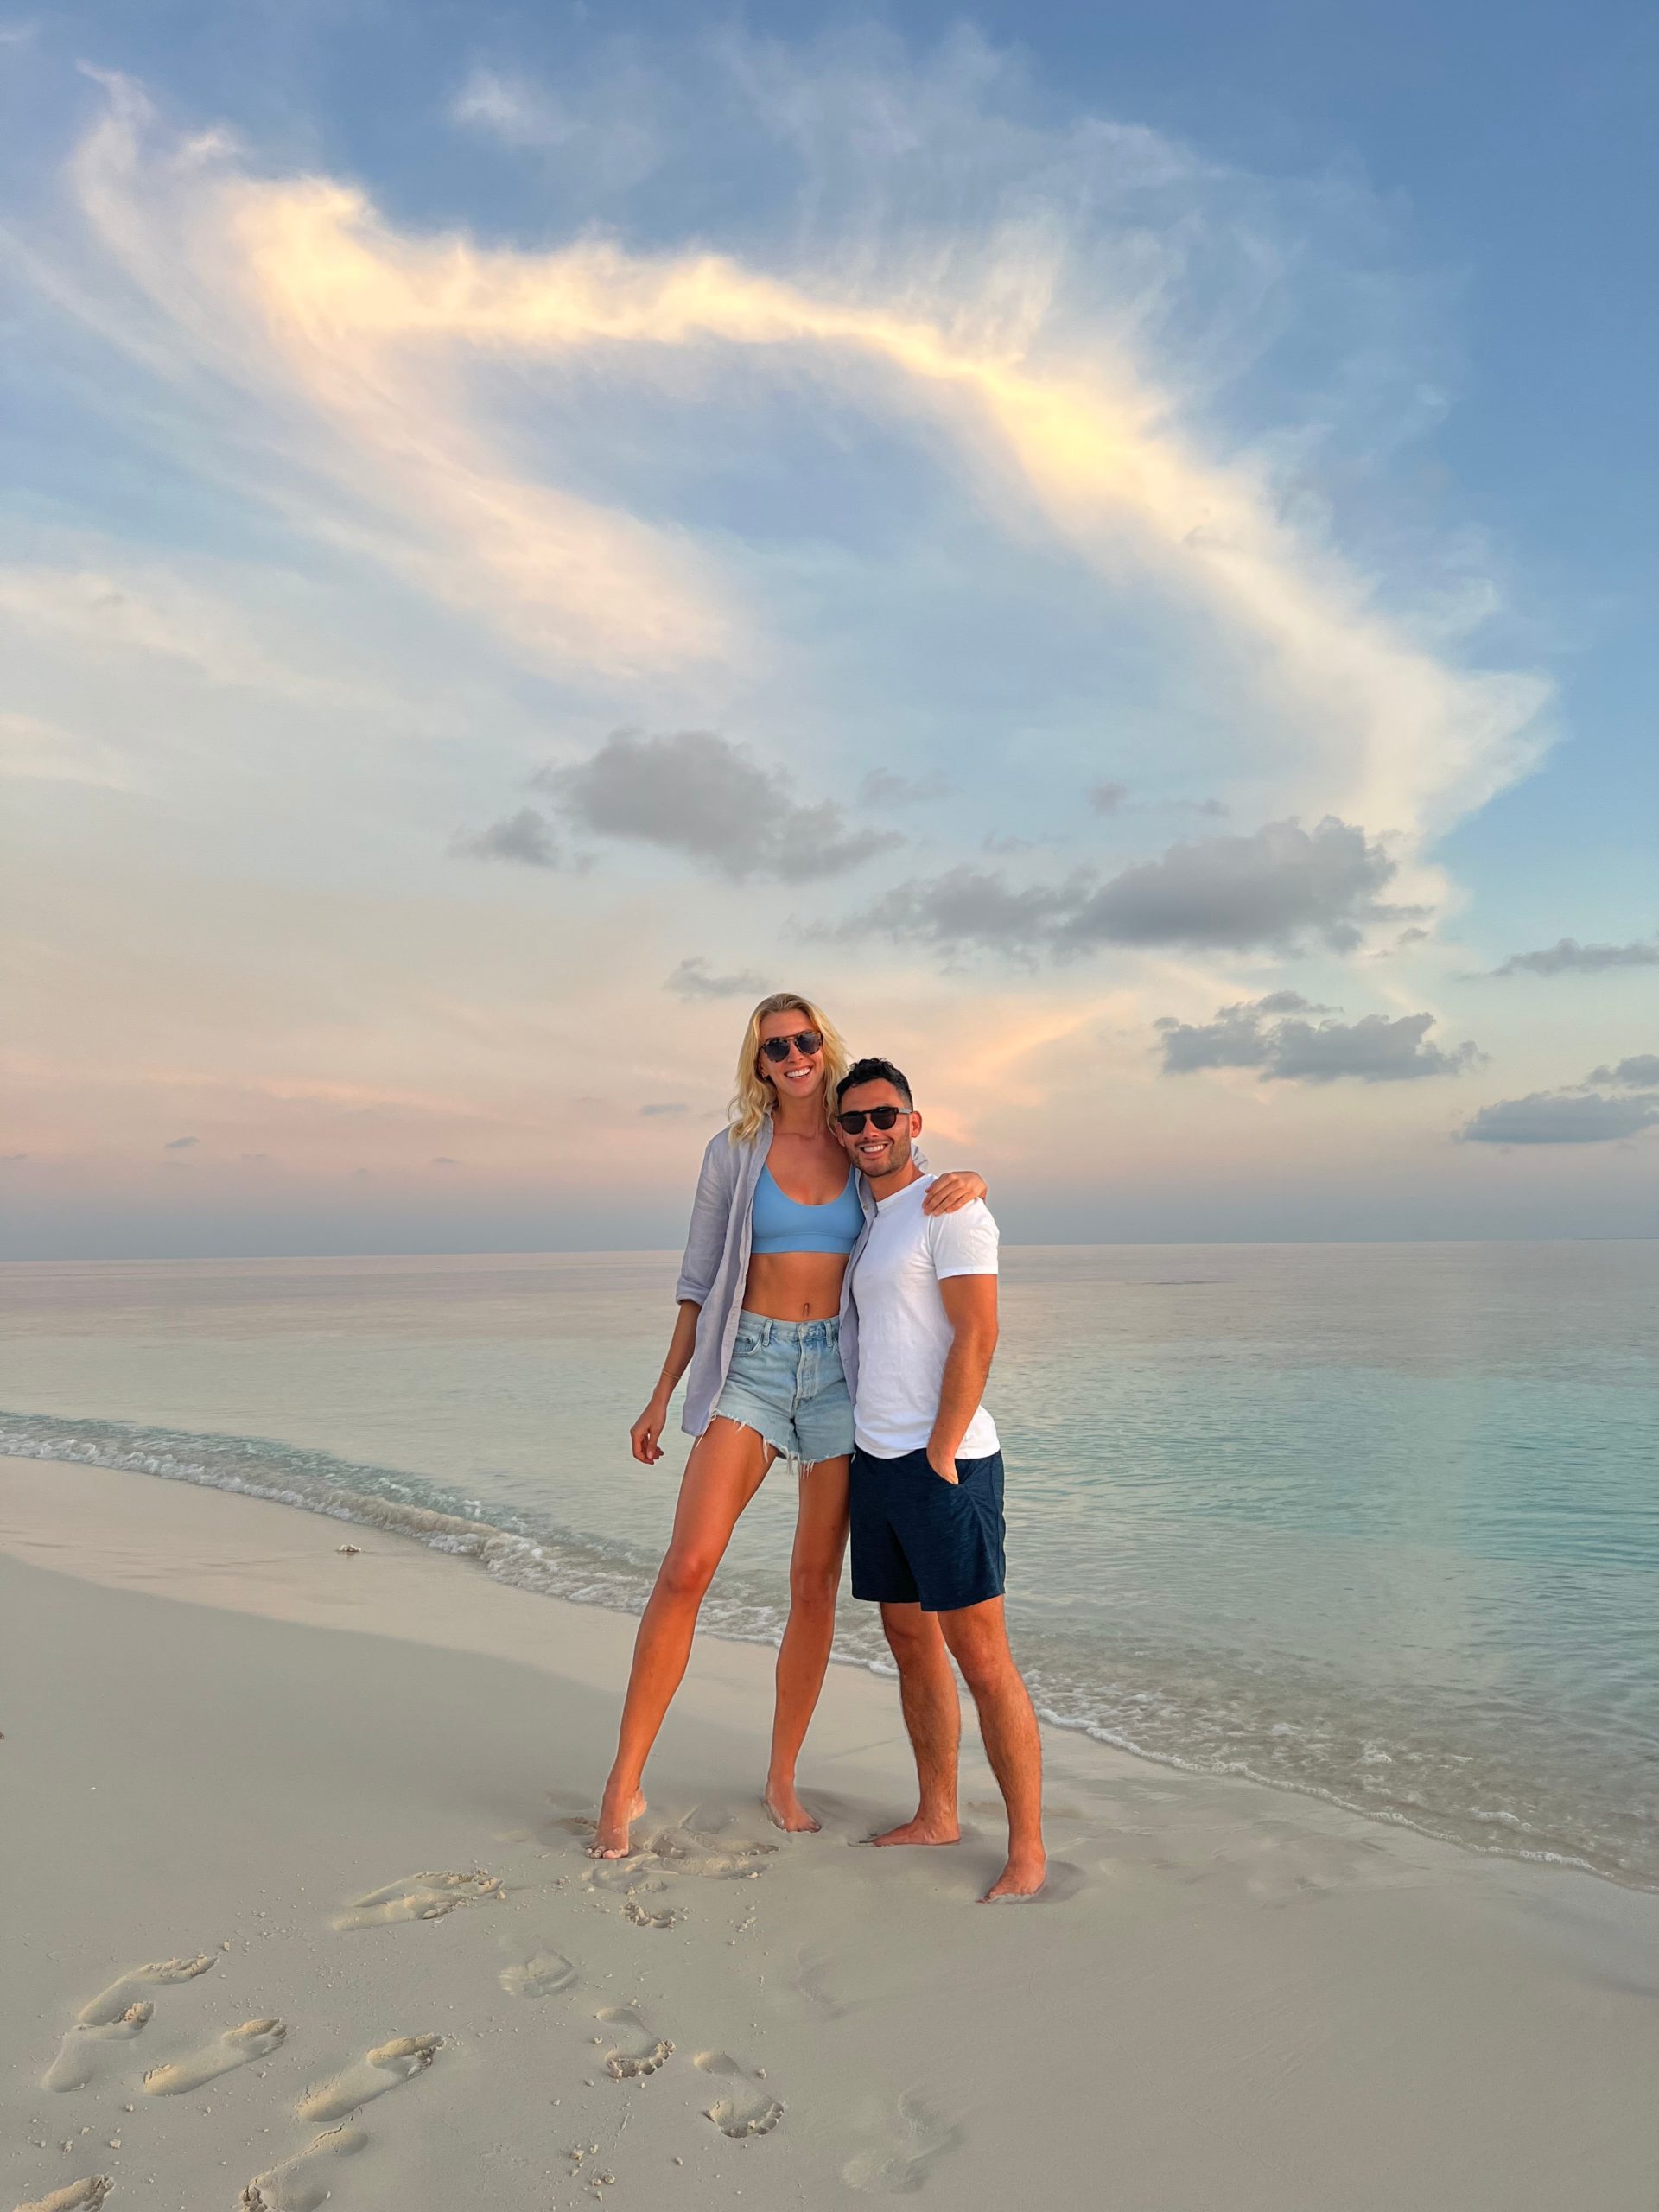 Zanna van Dijk and Ant stood on the beach in the Maldives